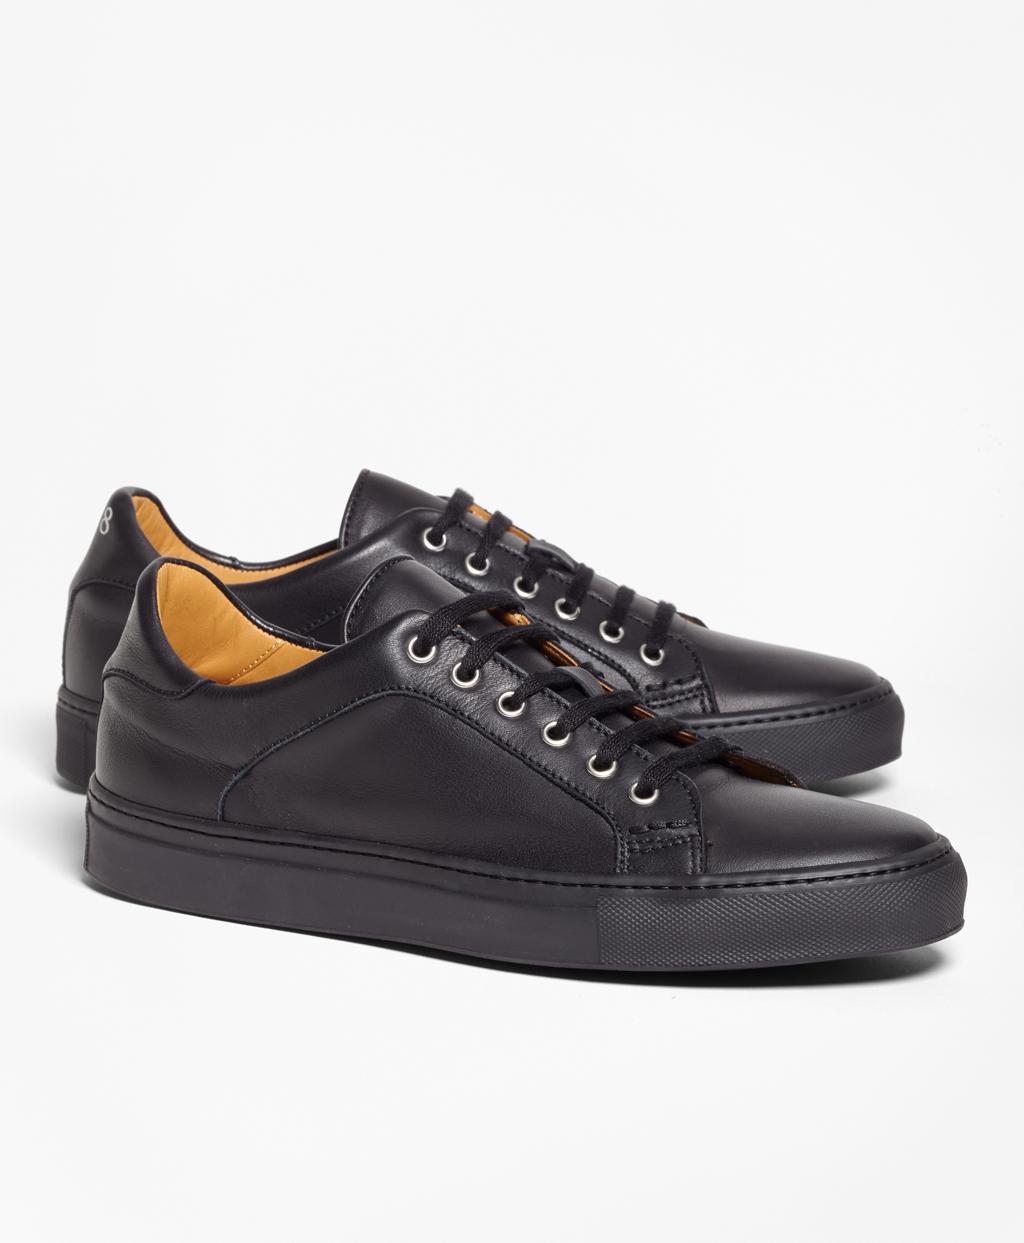 Brooks Brothers Leather Sneakers in Black for Men - Save 40% - Lyst